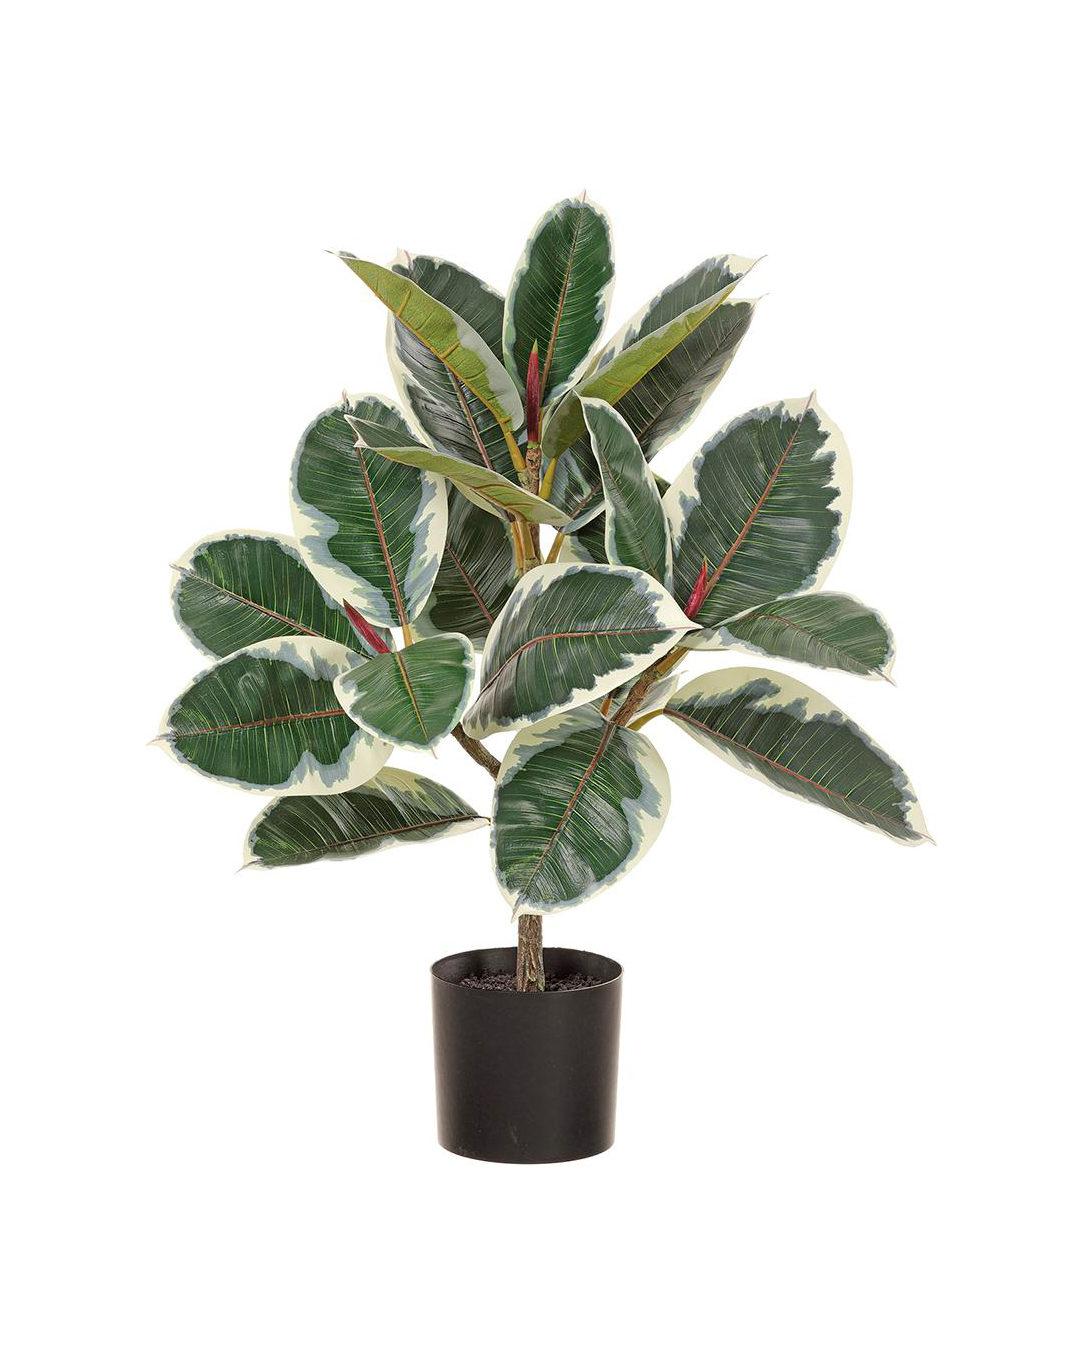 A potted AllState Floral And Craft variegated rubber plant with large, glossy leaves featuring creamy white and green patterns with pink accents, isolated against a white background in a Scottsdale, Arizona bungalow.